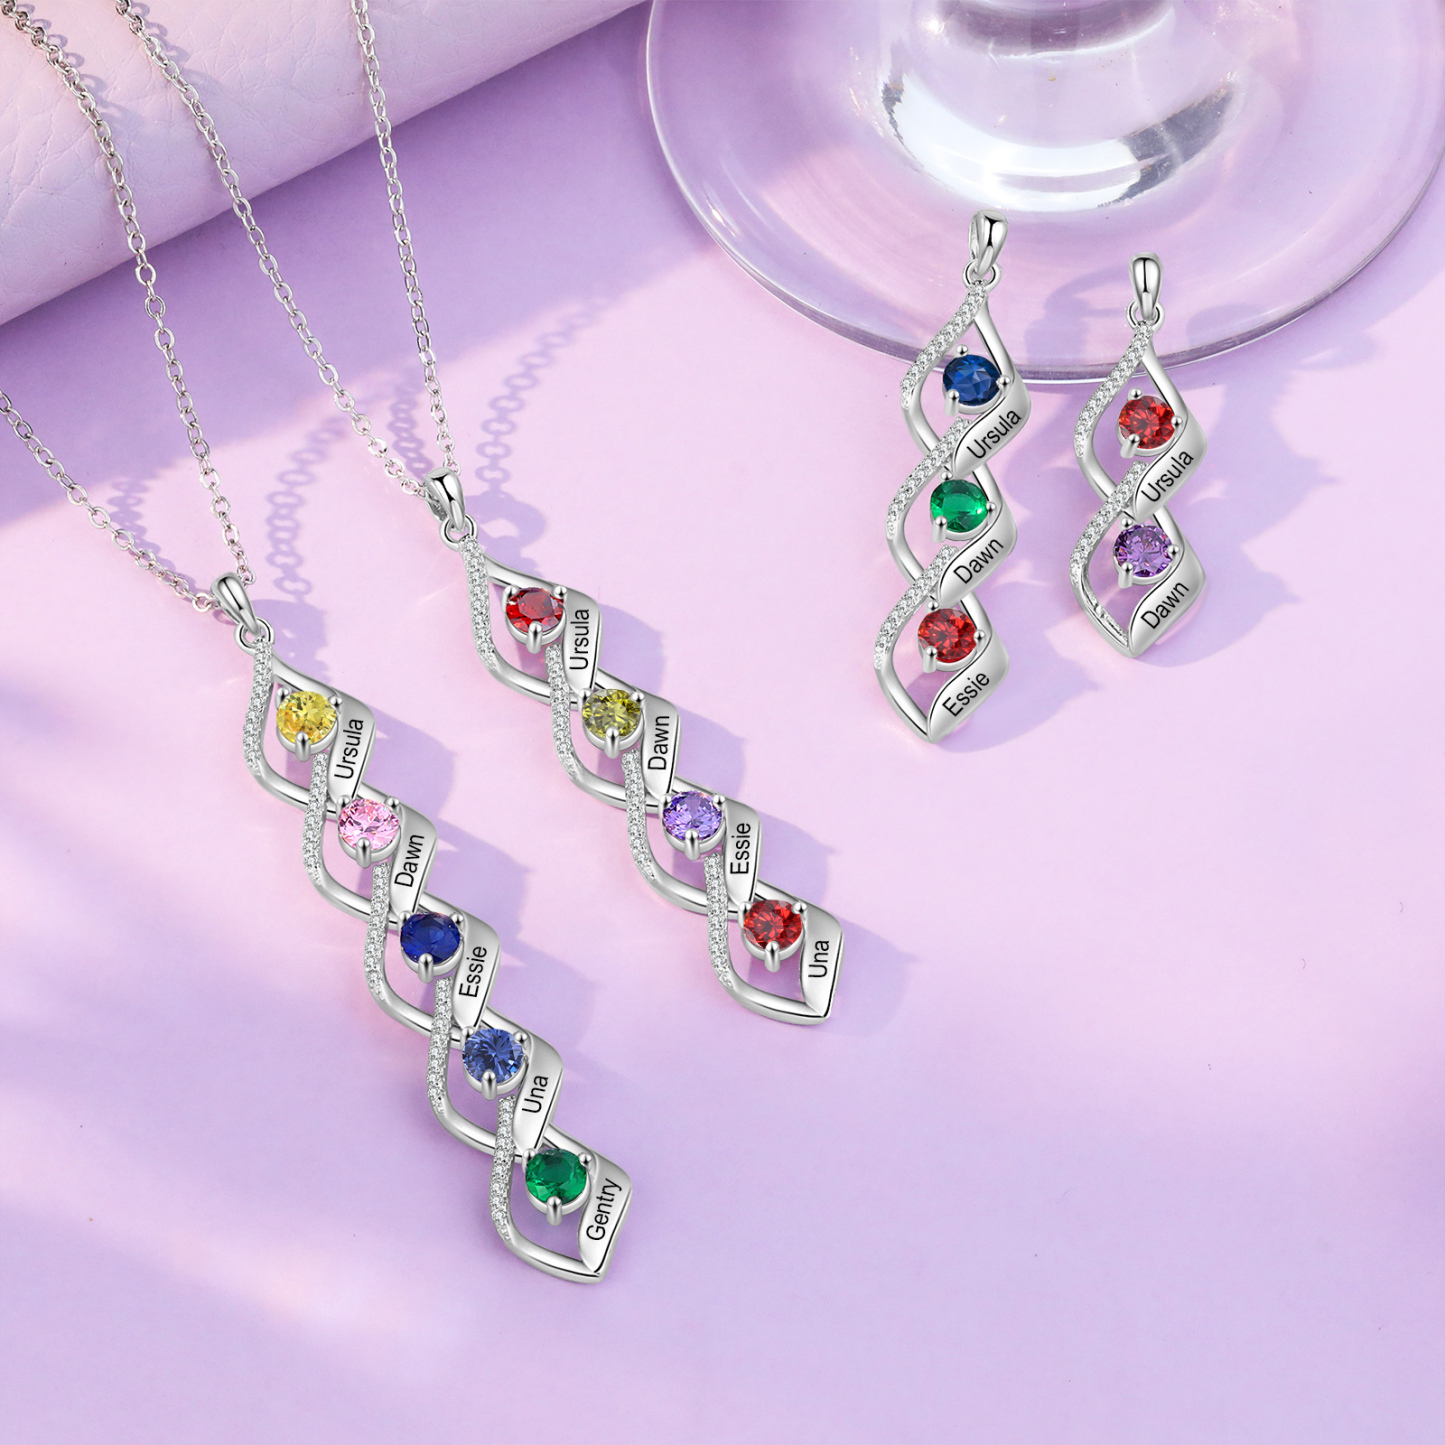 4 Names - Personalized Necklace Custom Birthstone Necklace Engraved with Name A special Gift For Mom/Grandma